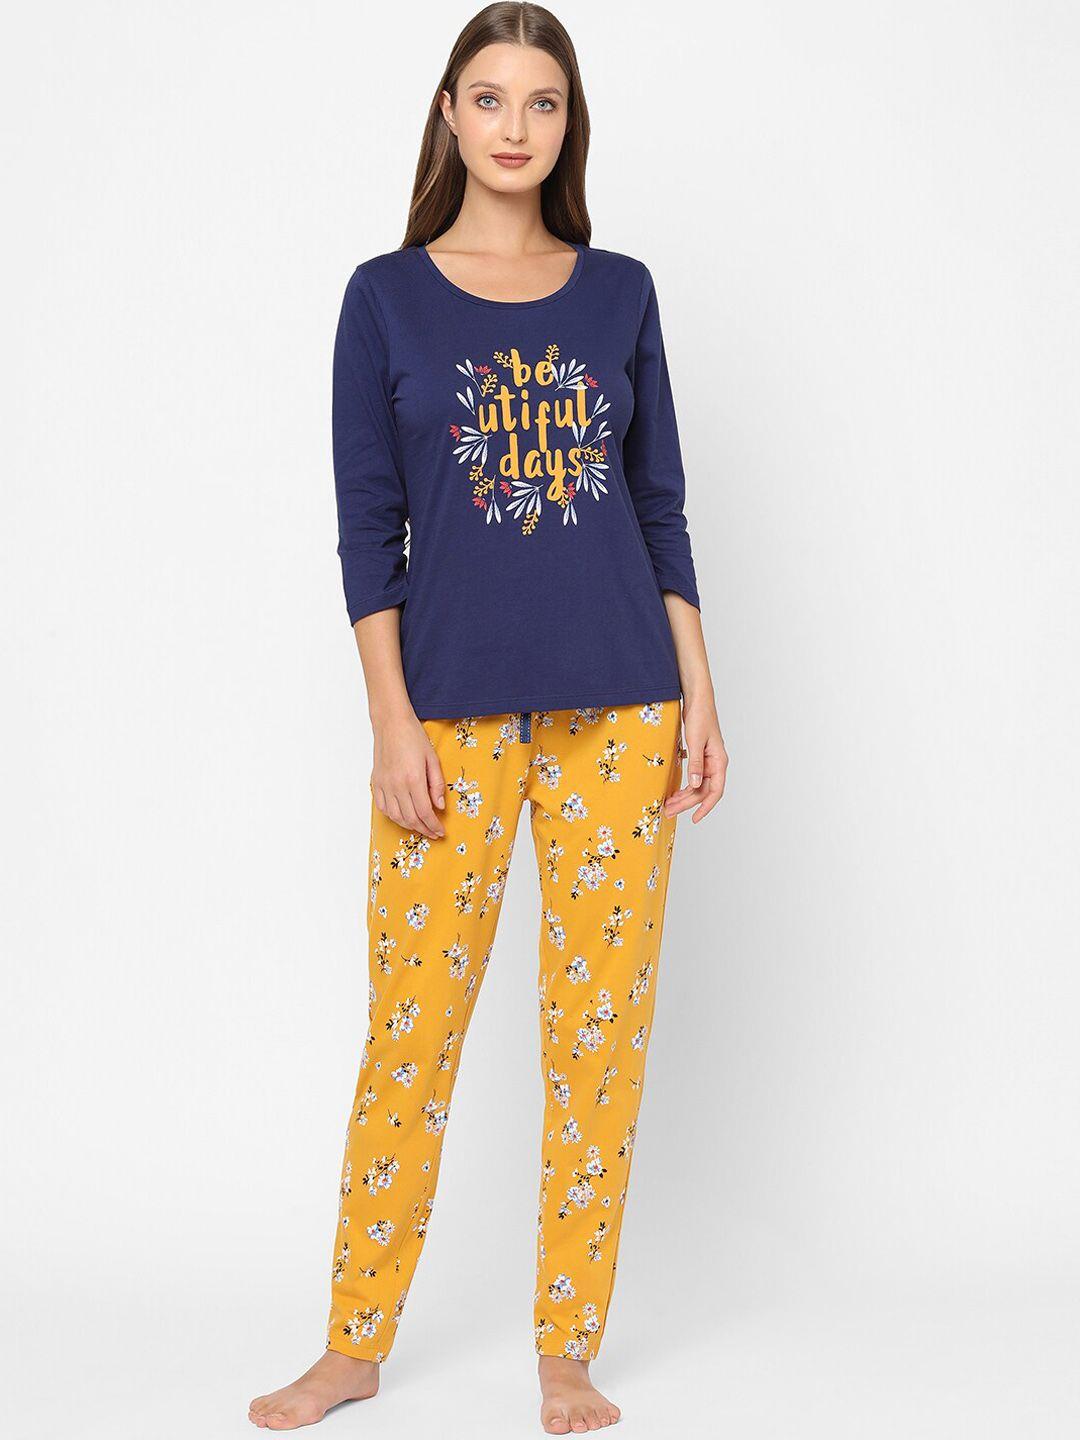 maysixty-women-yellow-&-navy-blue-printed-night-suit